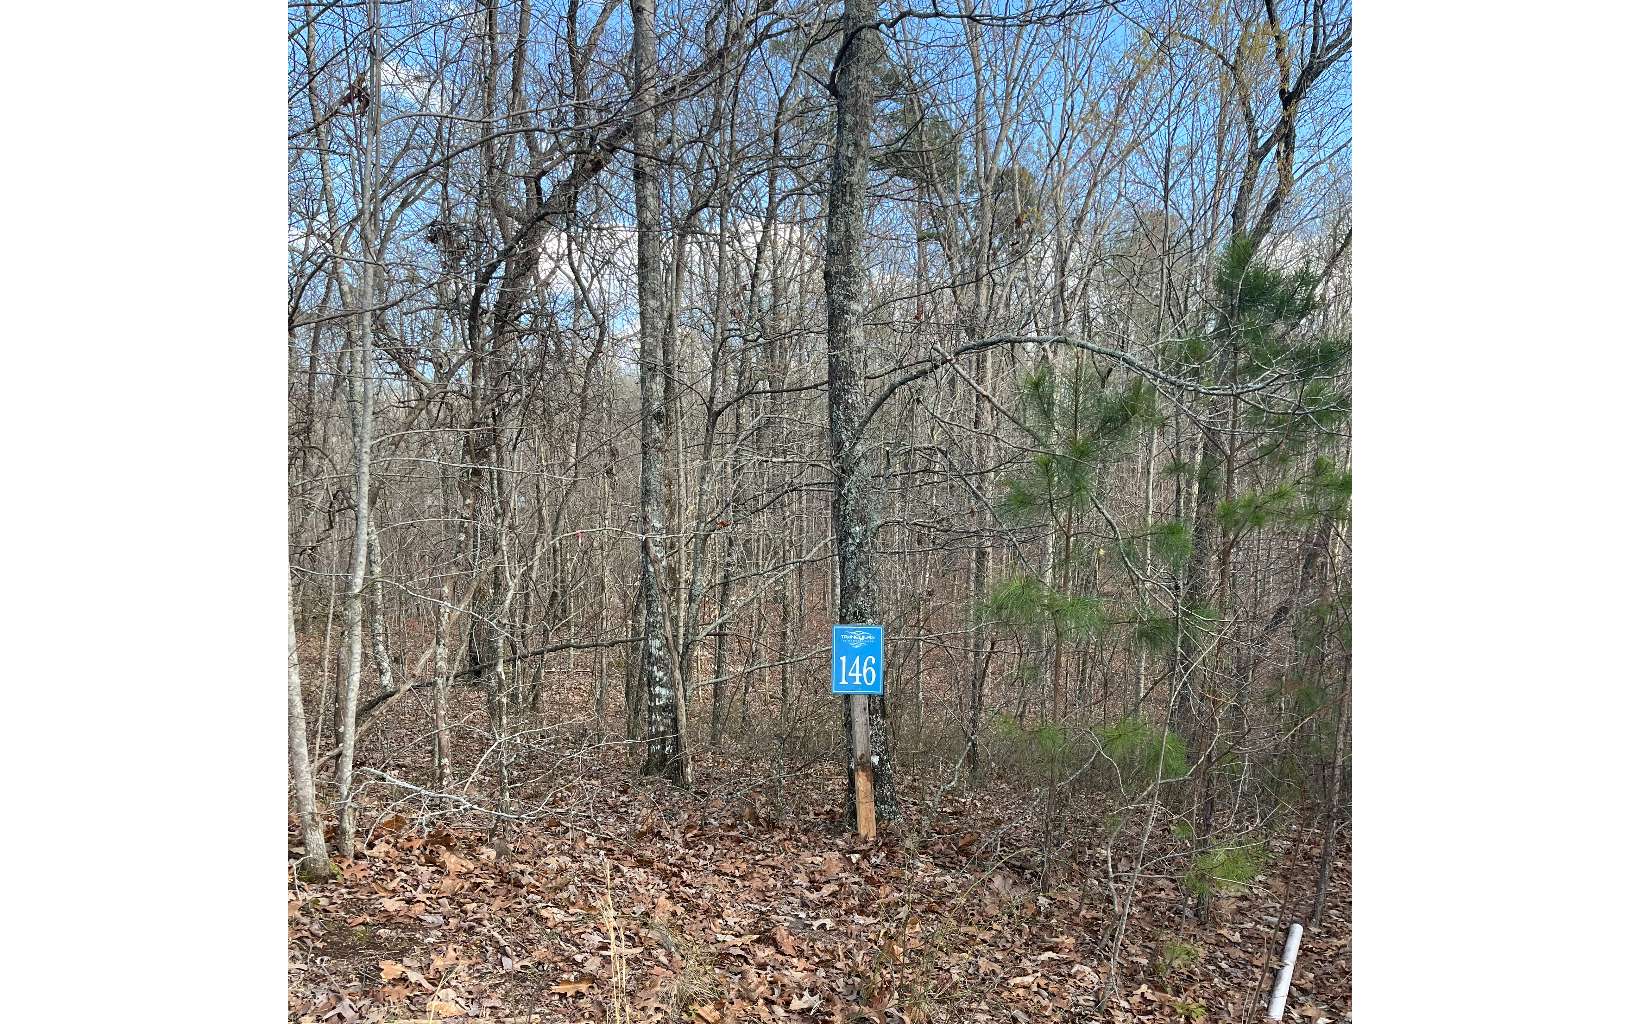 WELCOME to your future dream home! This lot will provide the perfect build site to make the home and memories you have always wanted. Located at the end of Harris Creek Drive; You will enjoy a large, wooded lot providing you with privacy and tranquility. Enjoy piece of mind with a gated community and protective covenants. You will also enjoy all this community has to offer with access to a playground, picnic area, covered pavilion, and walking paths. Enjoy boating with access to Carter's Lake boat ramp at the Dell Mountain recreational area. Don't let this beautiful lot at Tranquility at Carter's Lake slip away!!